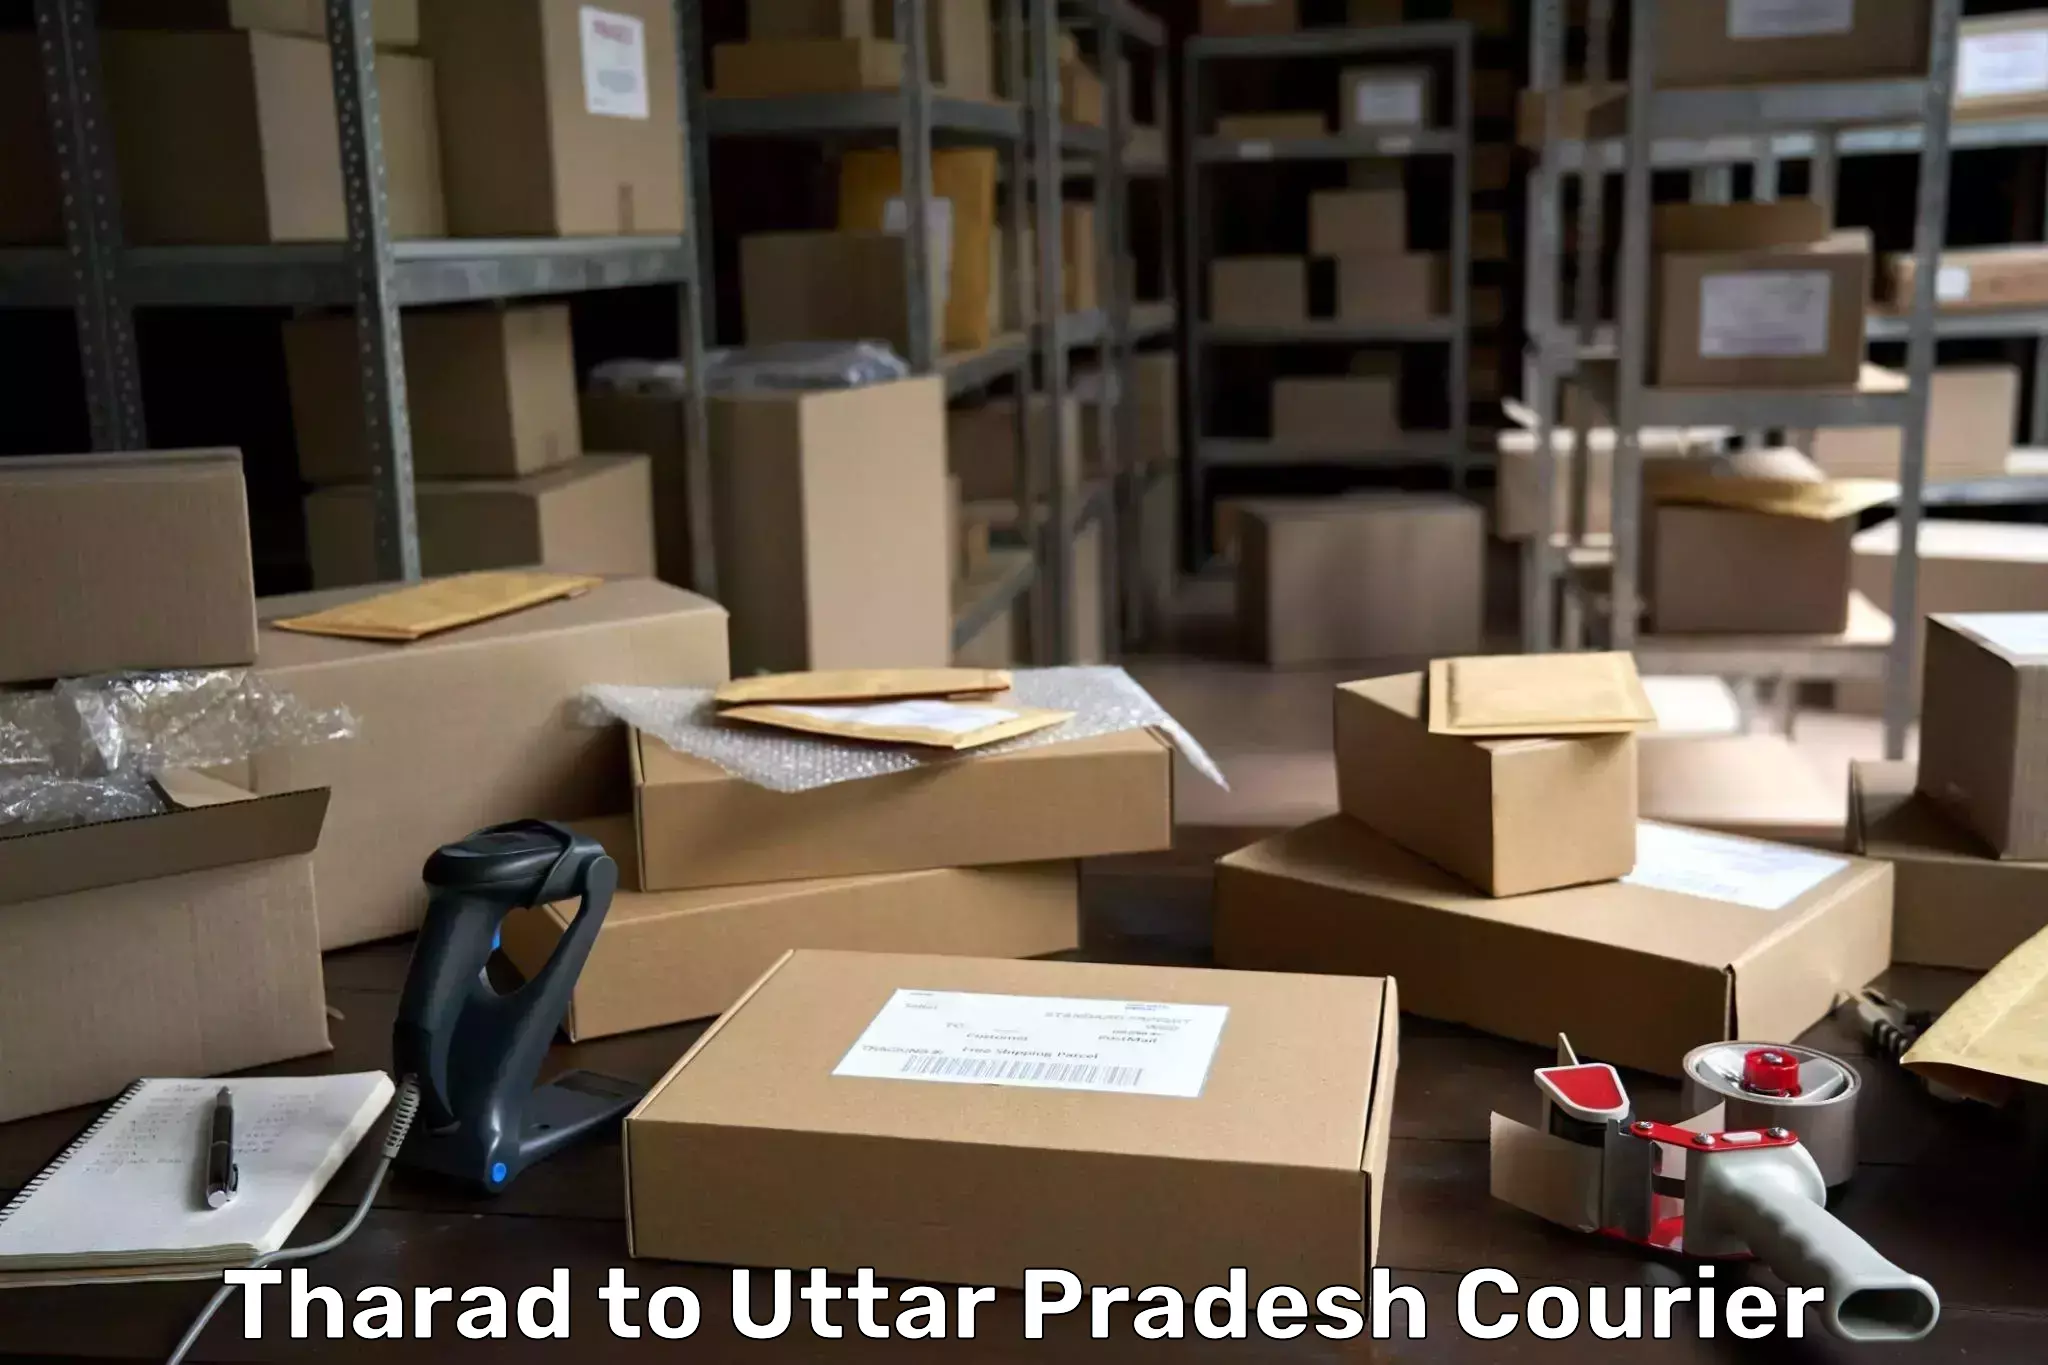 Fast delivery service Tharad to Ayodhya